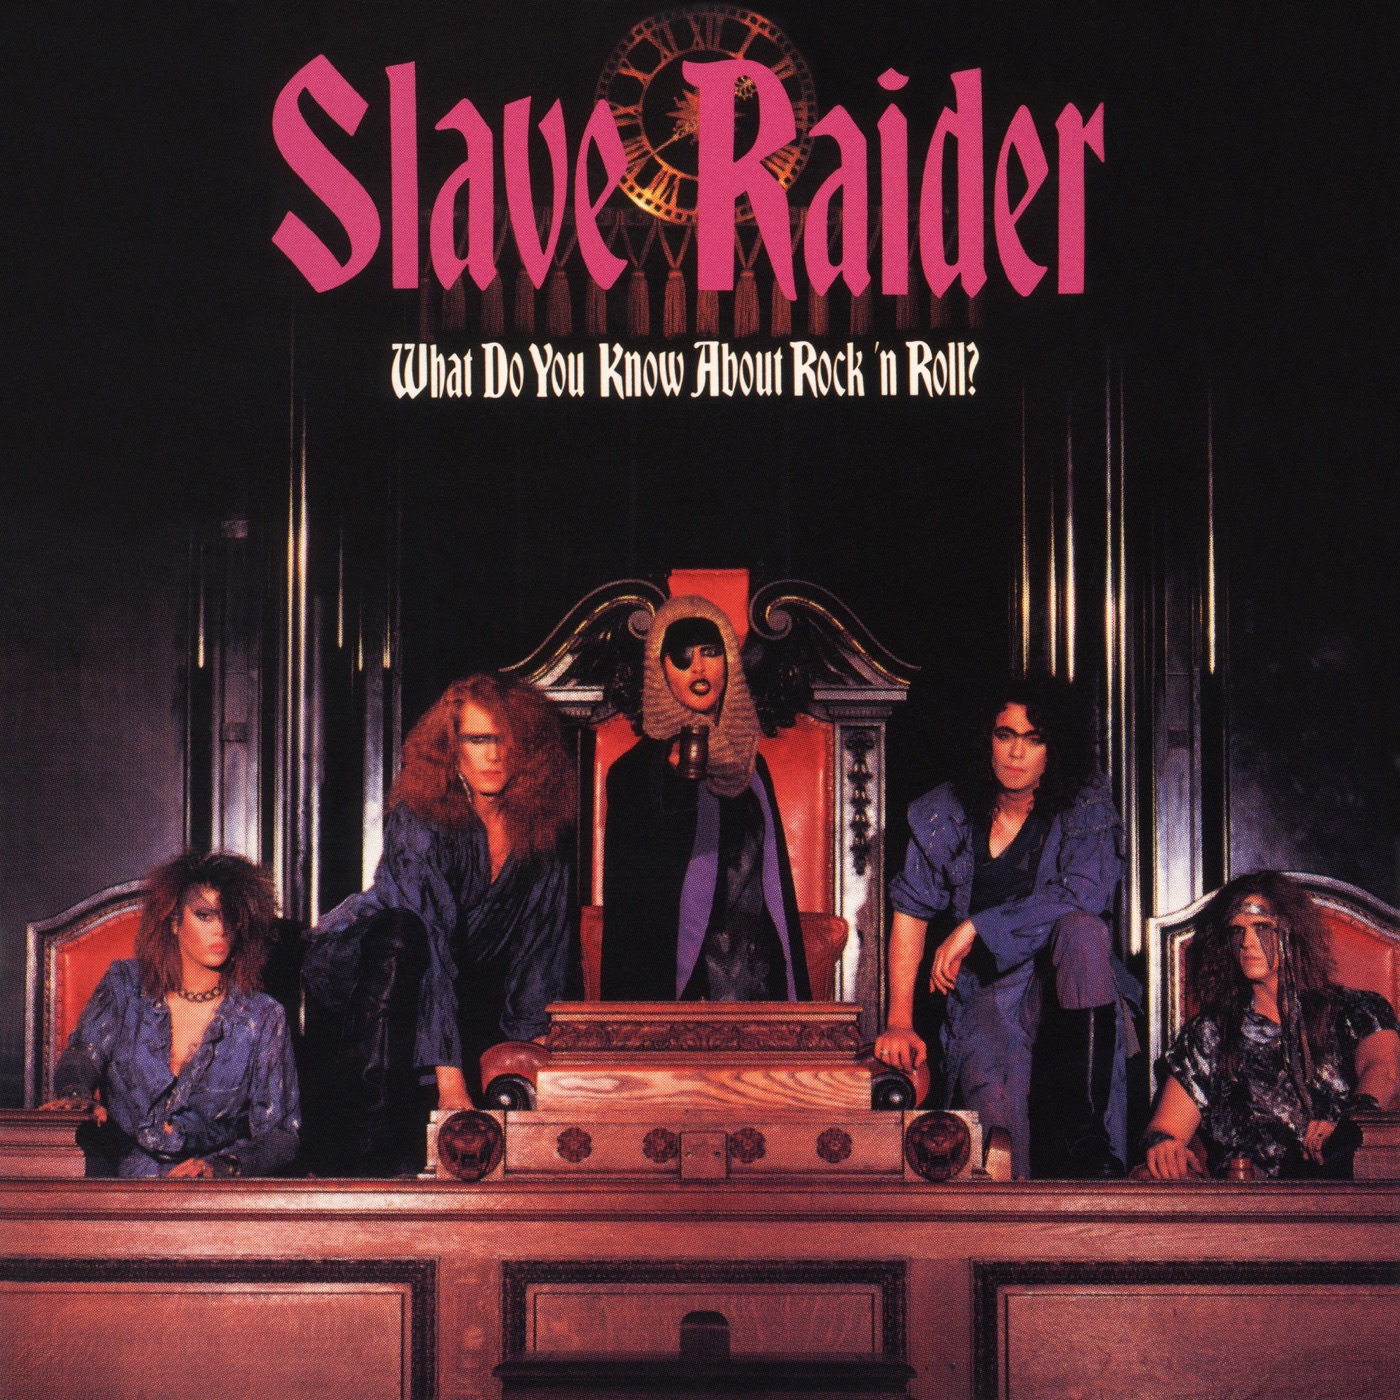 What Do You Know About Rock N' Roll? by Slave Raider